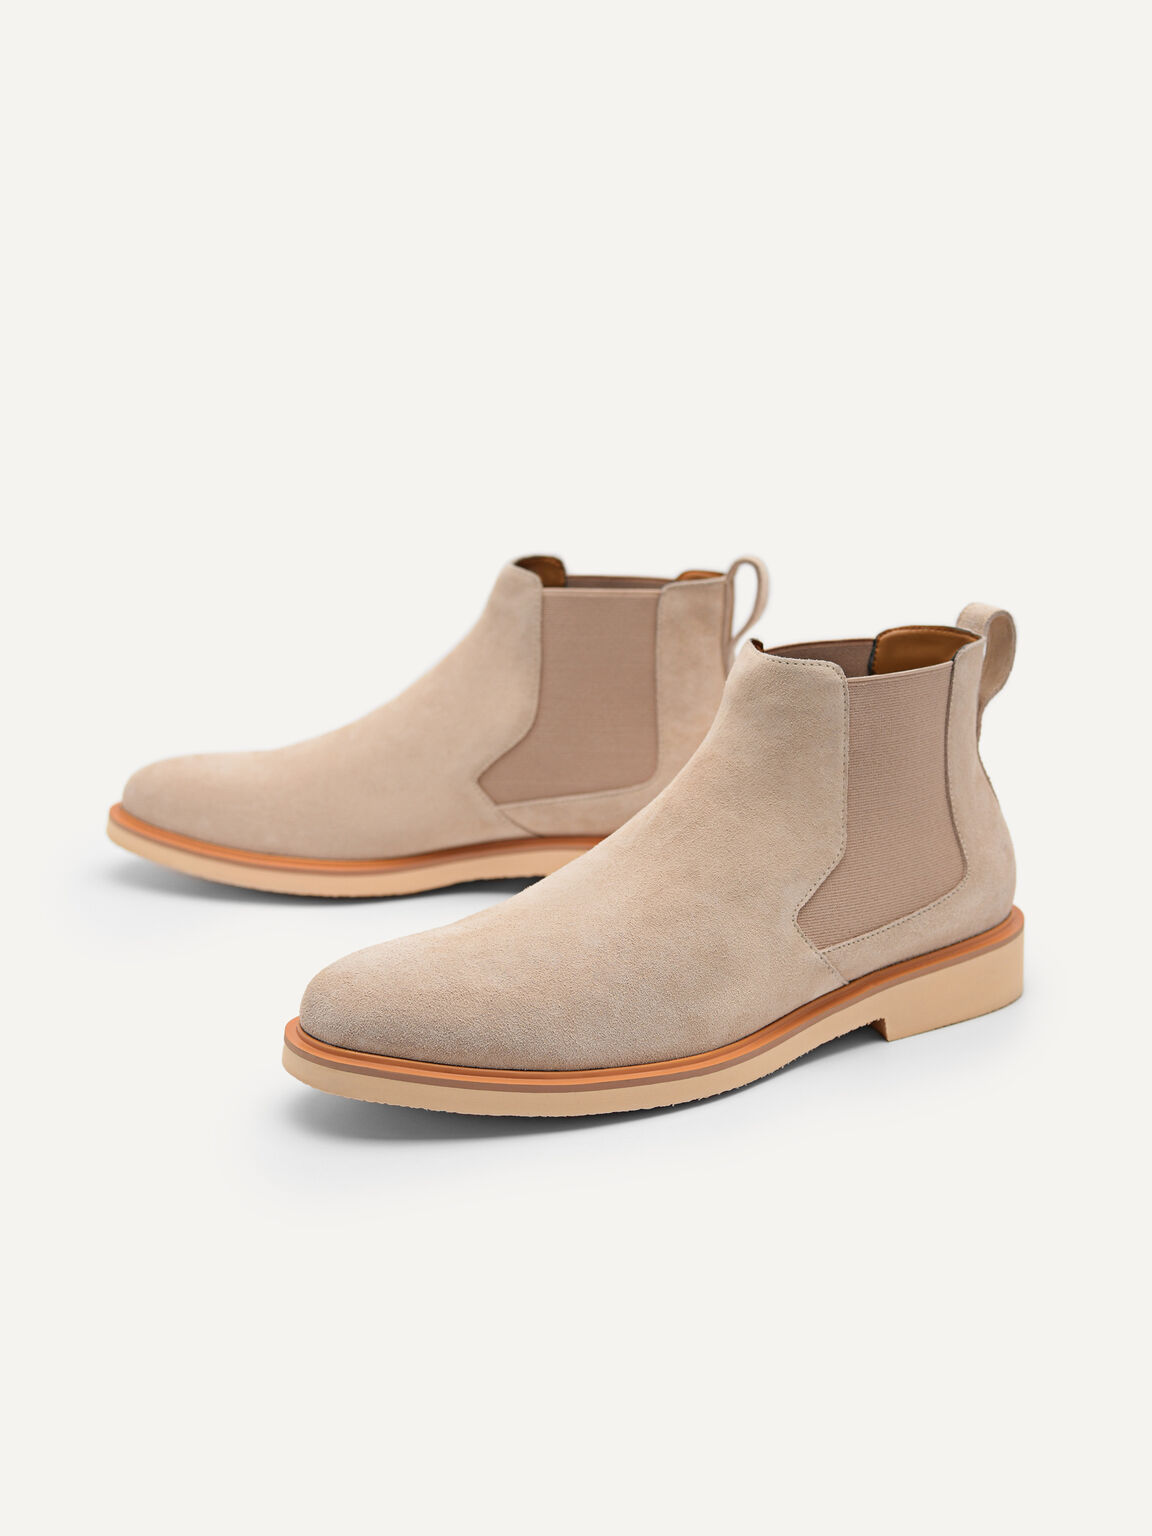 Beige Leather Ankle Boots, Beige